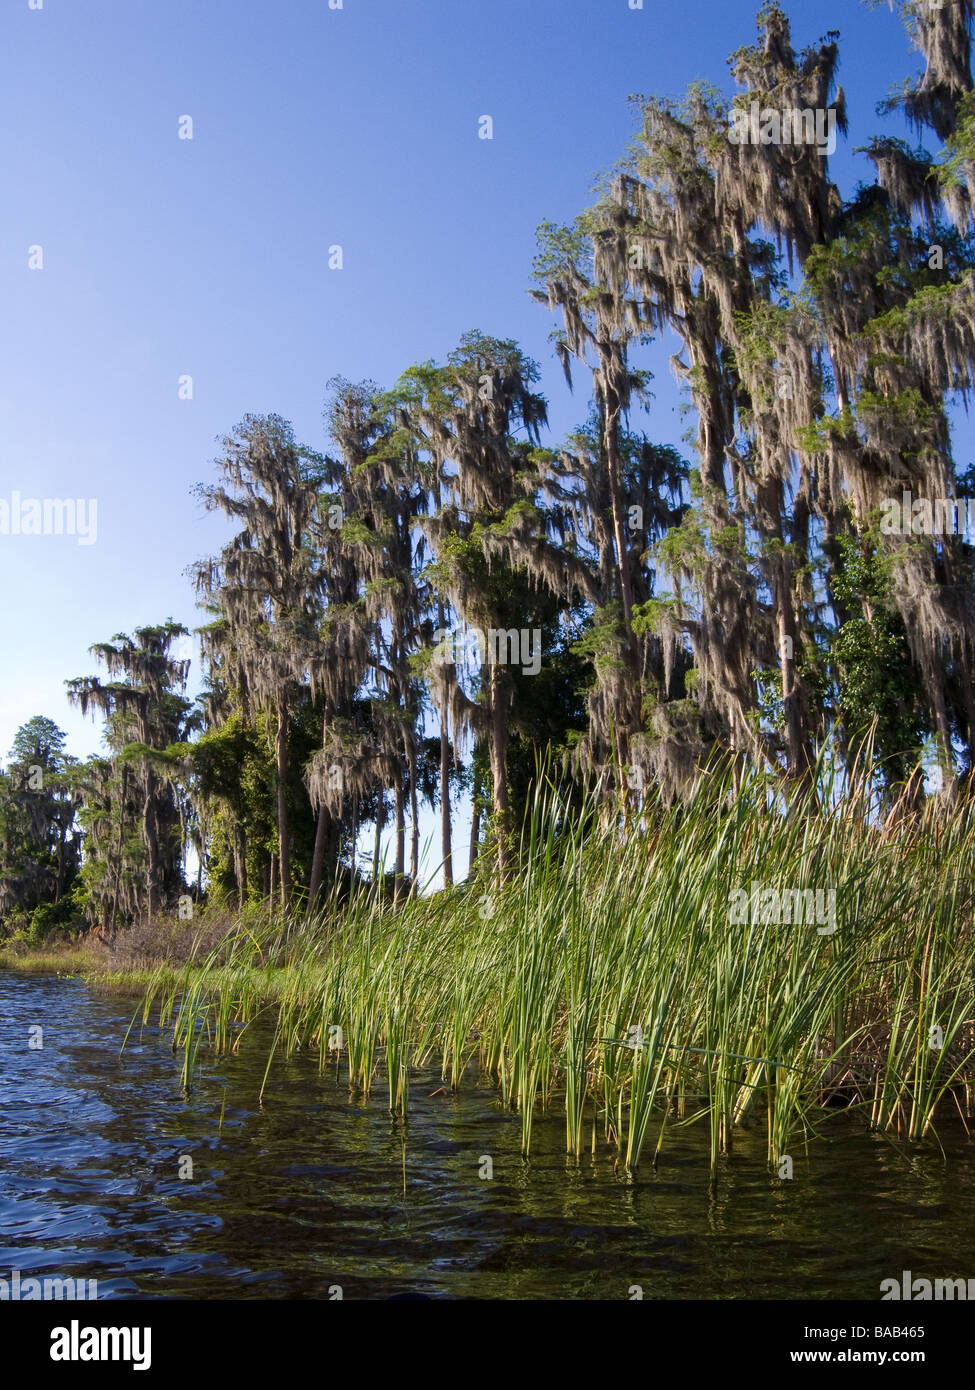 Bald Cypress trees draped with Spanish Moss along shore Lake Louisa State Park Clermont Florida Stock Photo